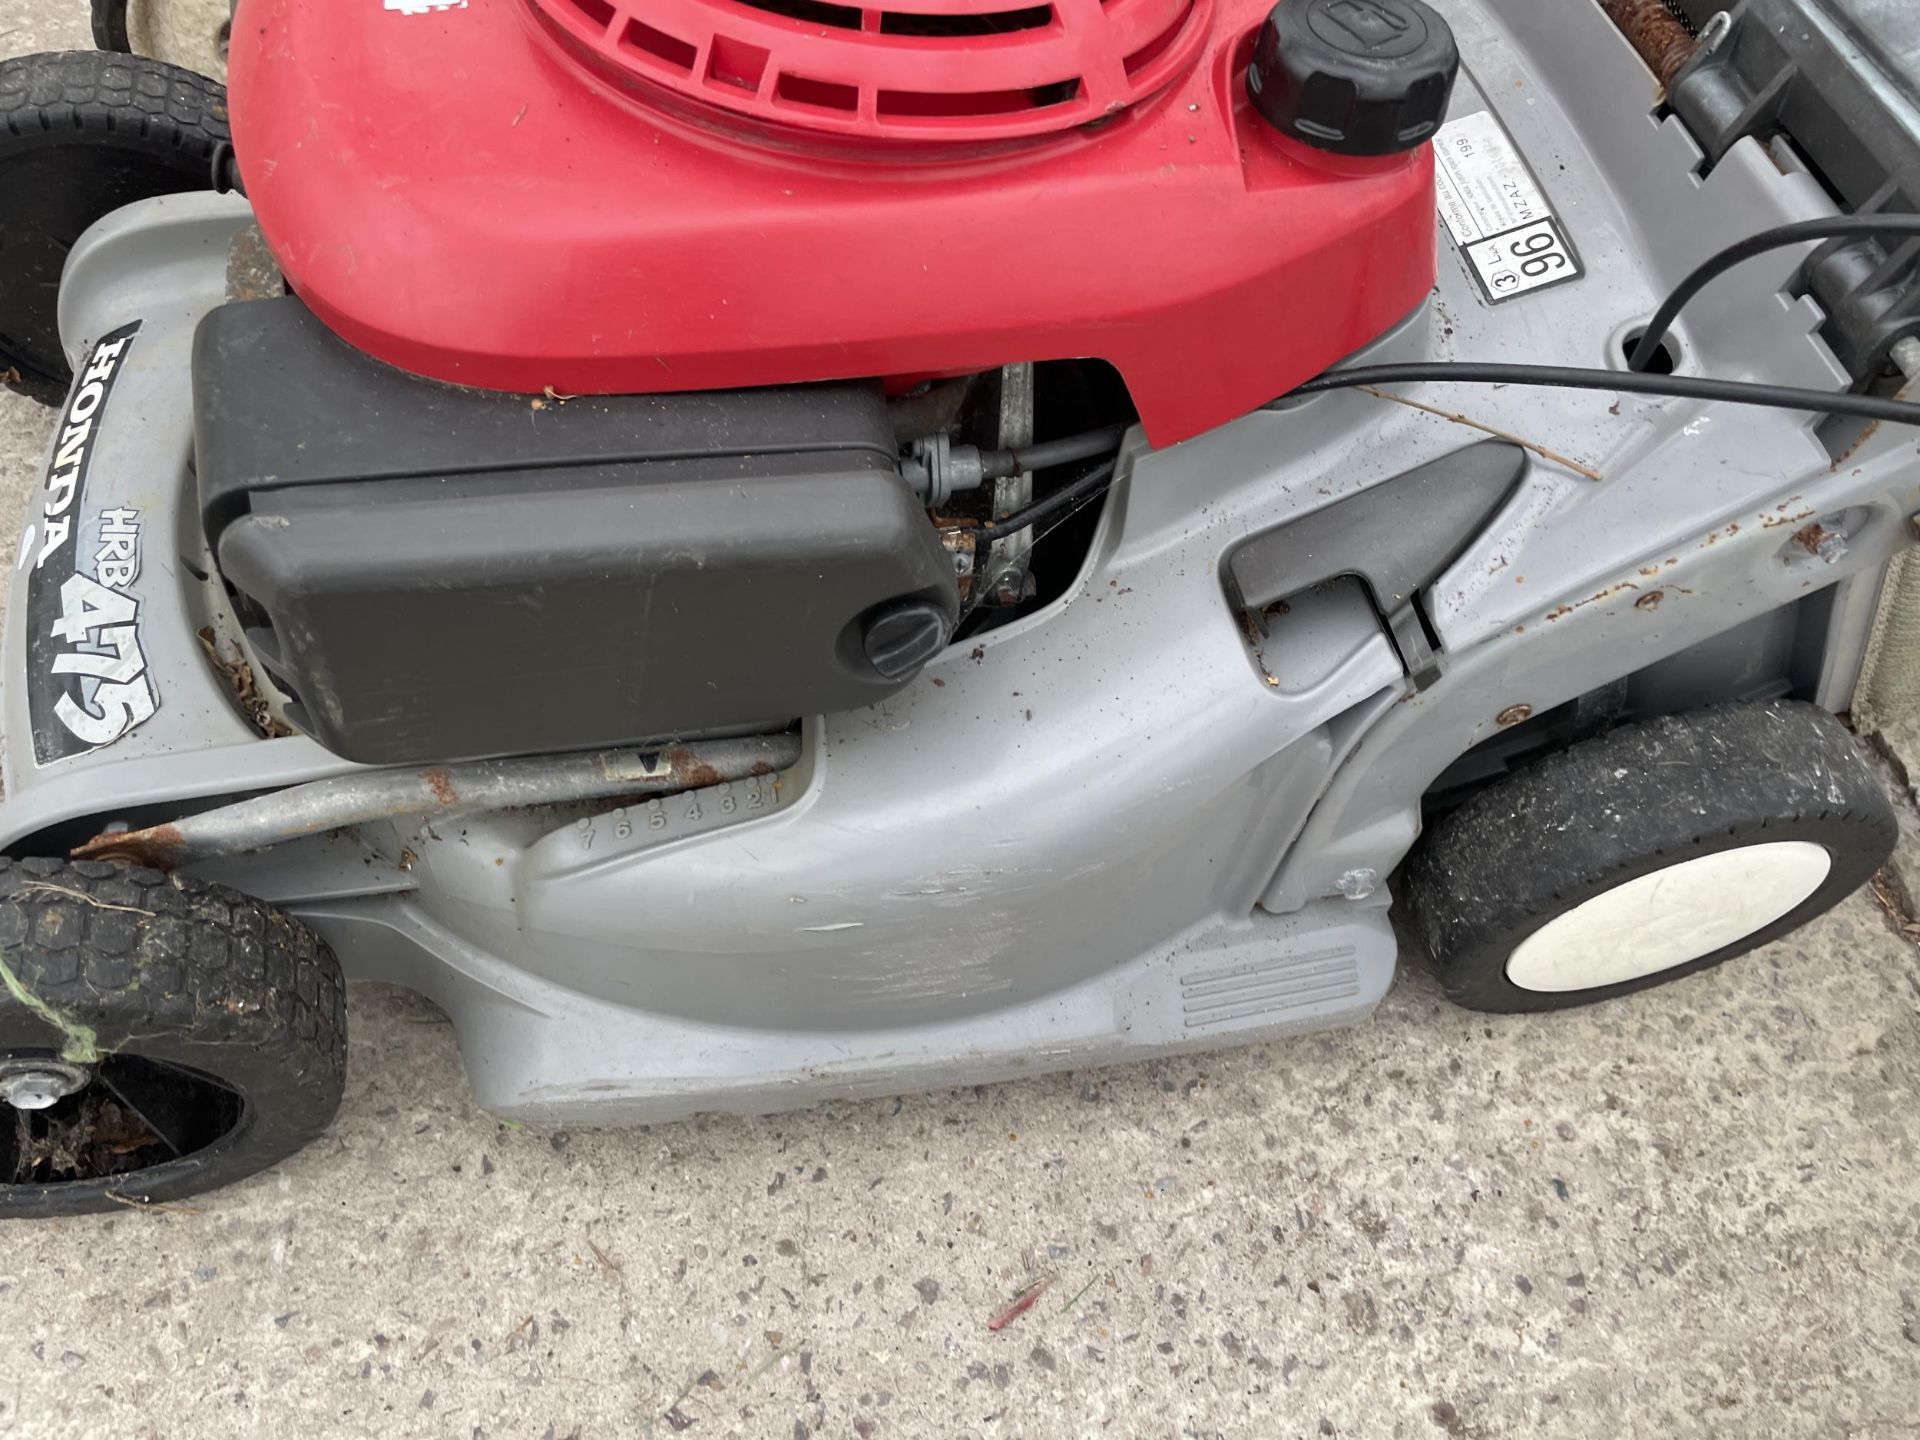 A HONDA HRB475 PETROL LAWN MOWER WITH GRASS BOX - Image 3 of 4